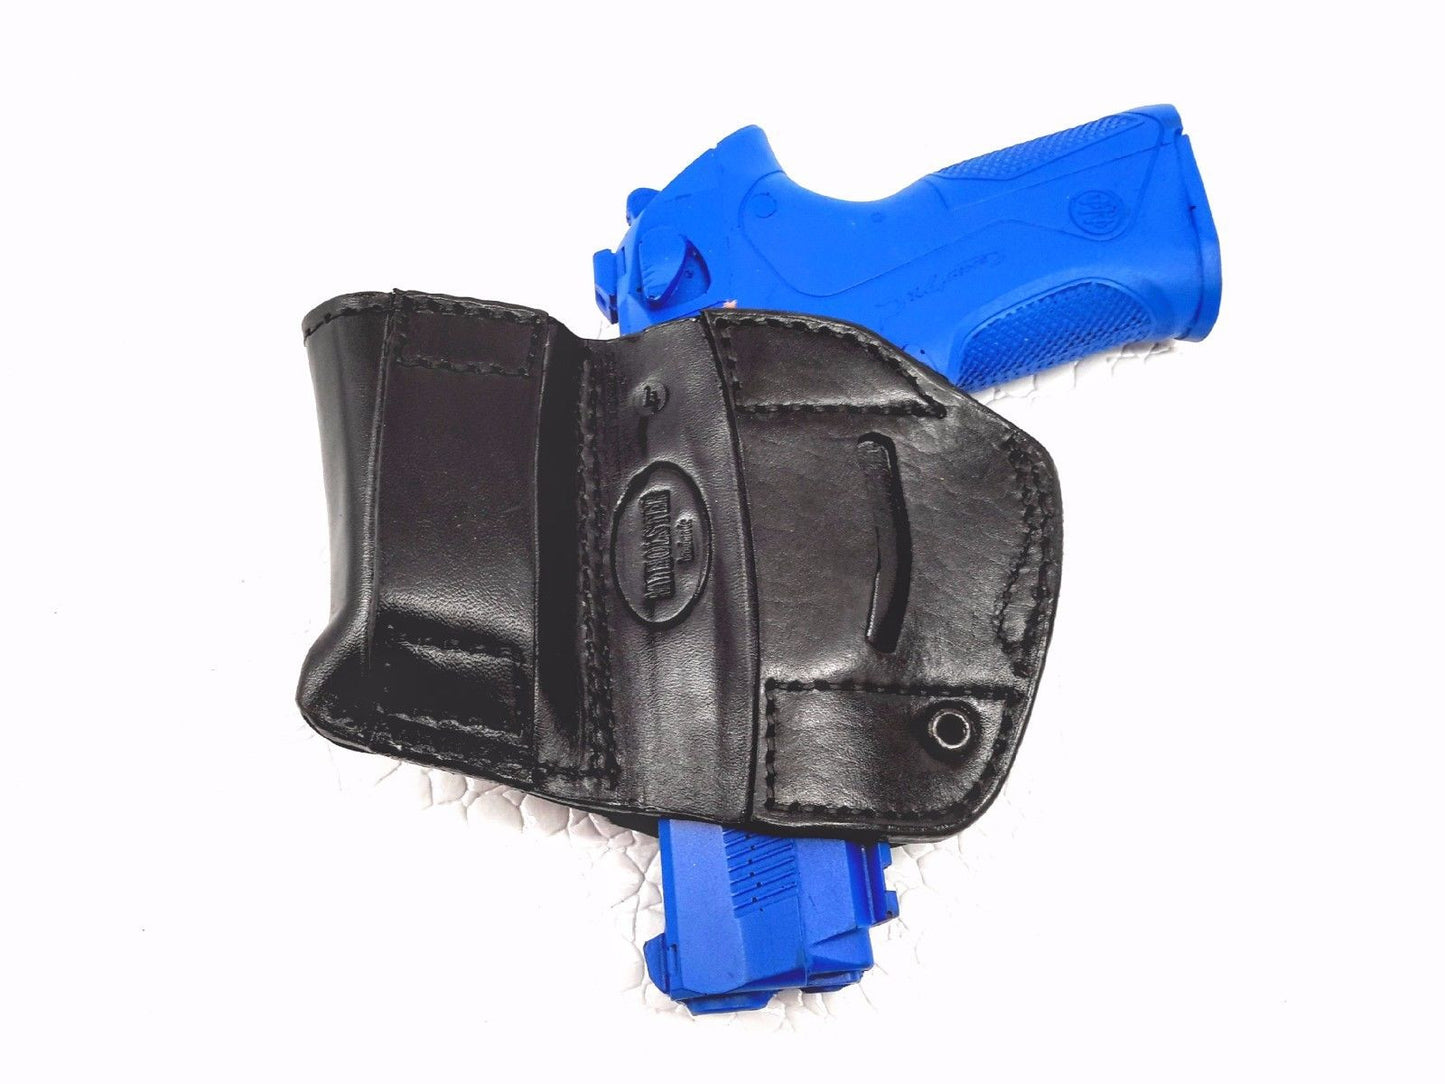 Beretta Px4 Storm Full Size .45 ACP Belt Holster with Mag Pouch Leather Holster